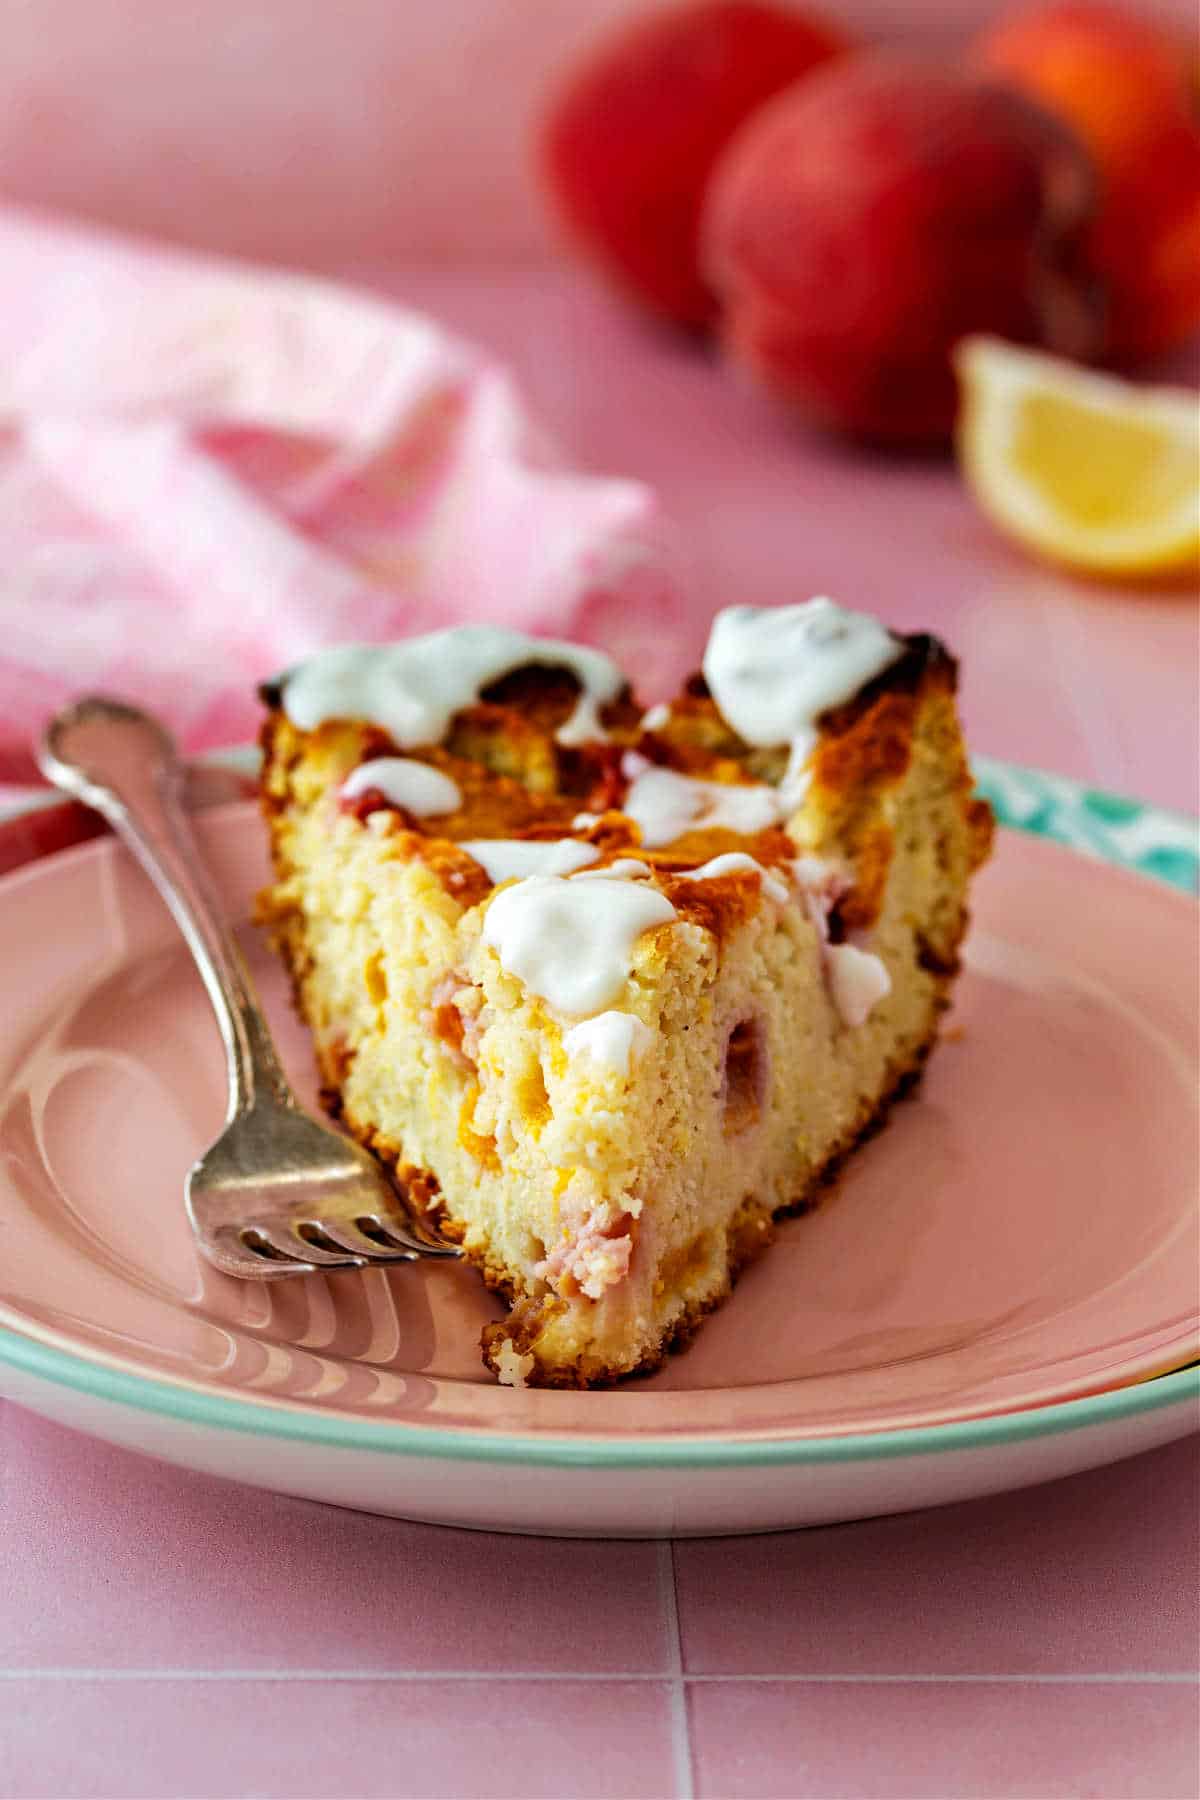 A slice of cake with lots of pieces of peaches in it and on top on a pink plate with 3 peaches and a slice of lemon in the background.